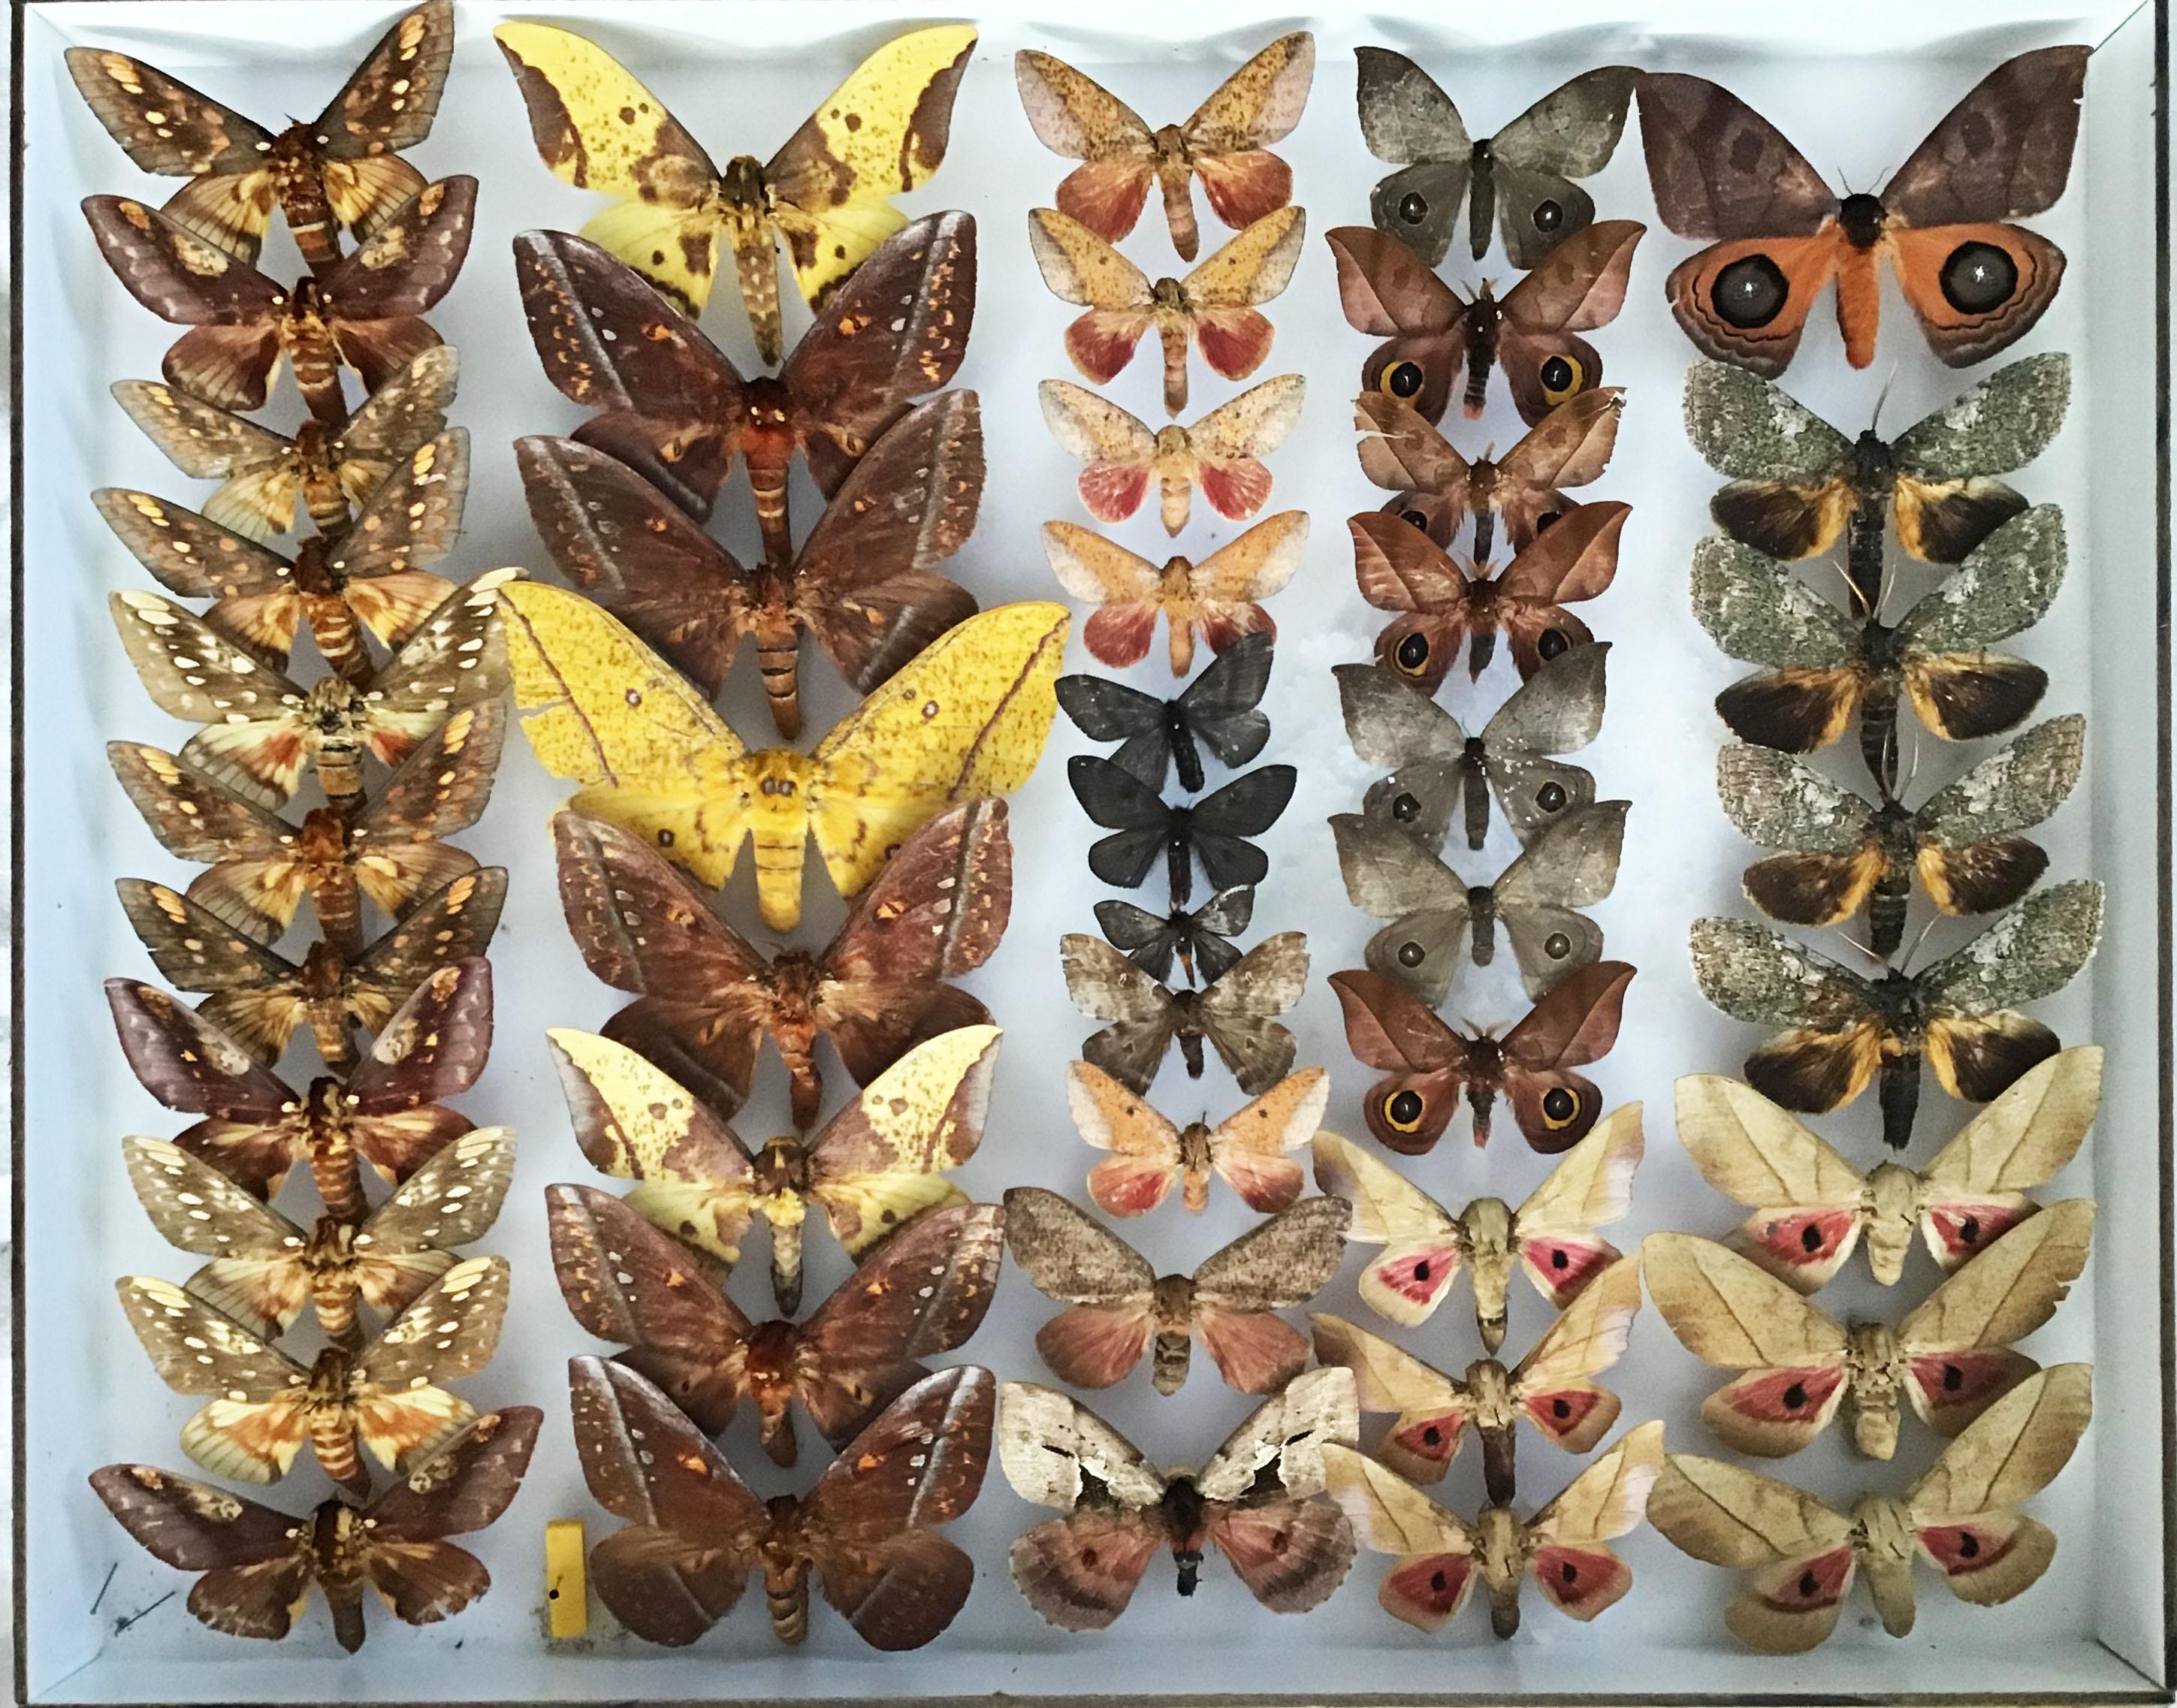 Pair of vintage display cases filled with rare and exotic silk Saturniidae moths from around the world. 

This specific collection was decommissioned from the esteemed Natural History Museum in Belgium. The display cases are from the 1960s and the